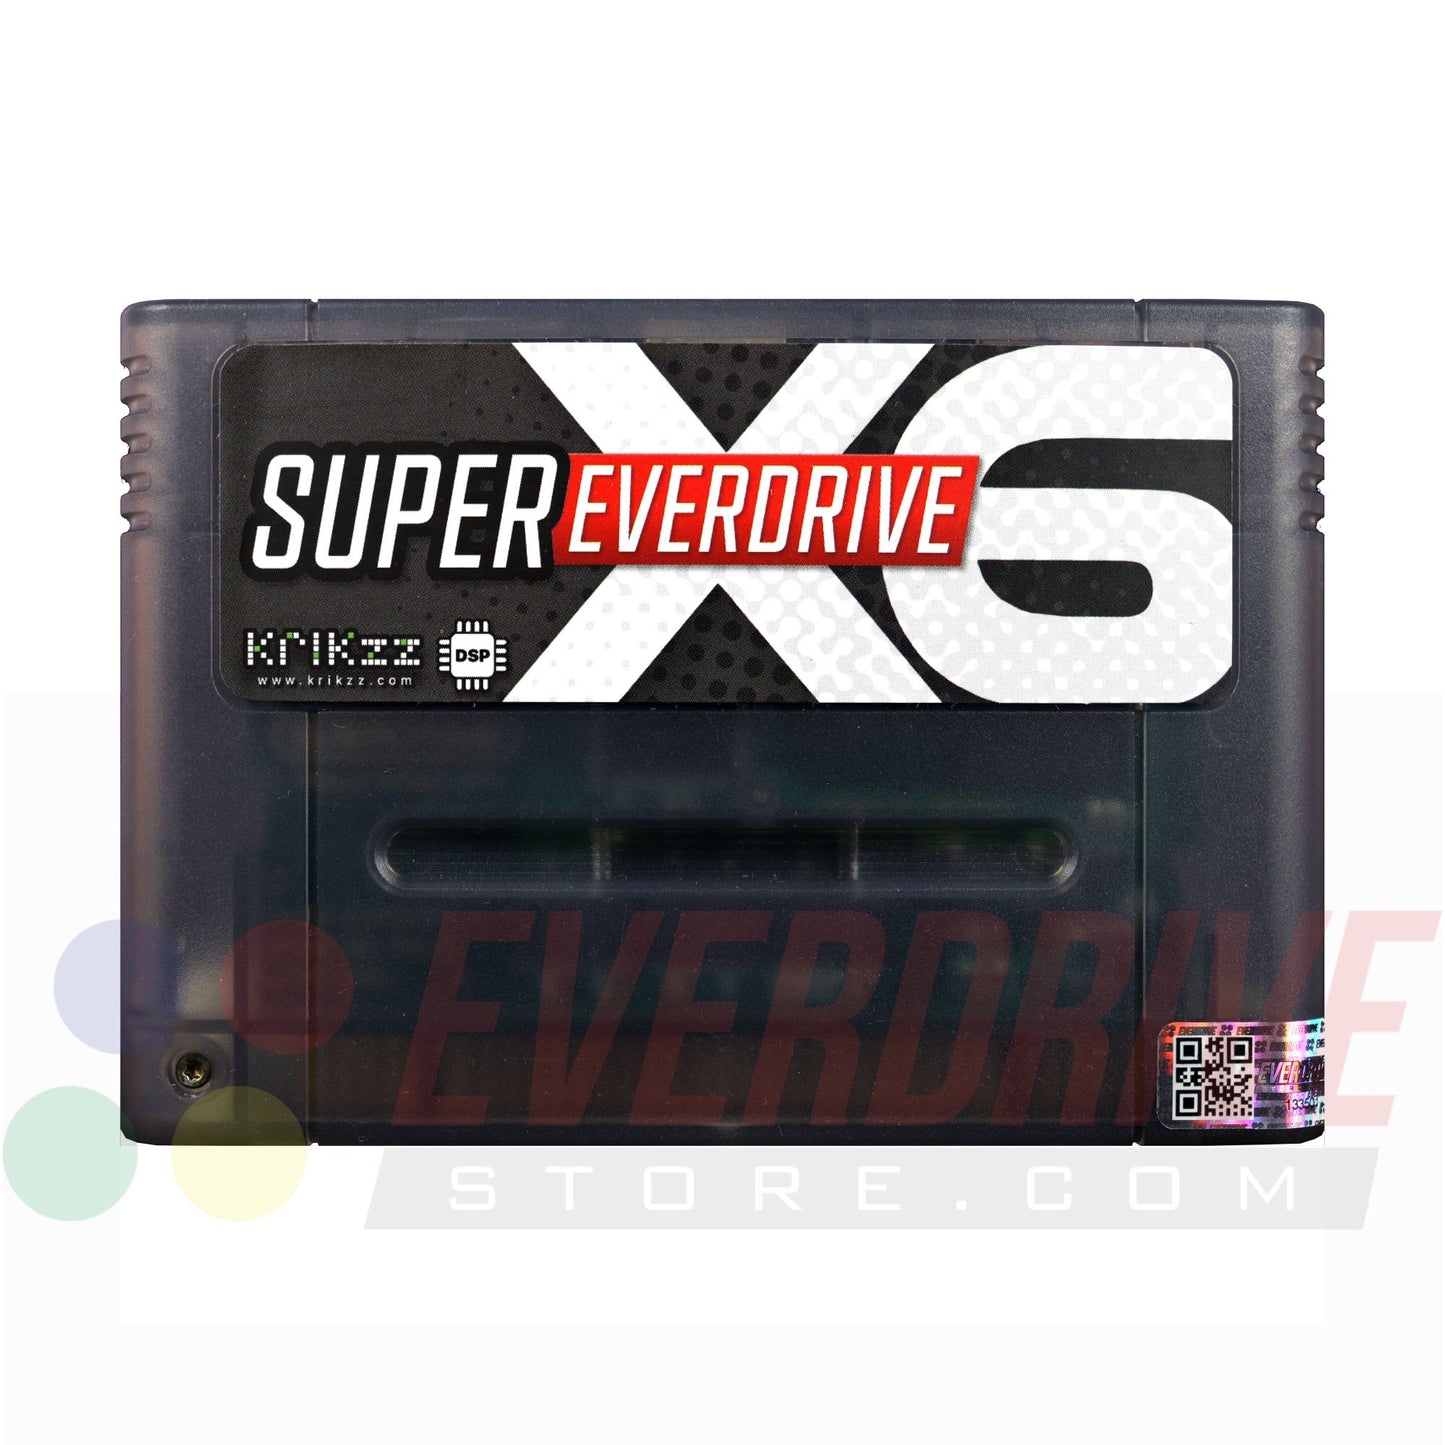 Super Everdrive X6 DSP - Frosted Black